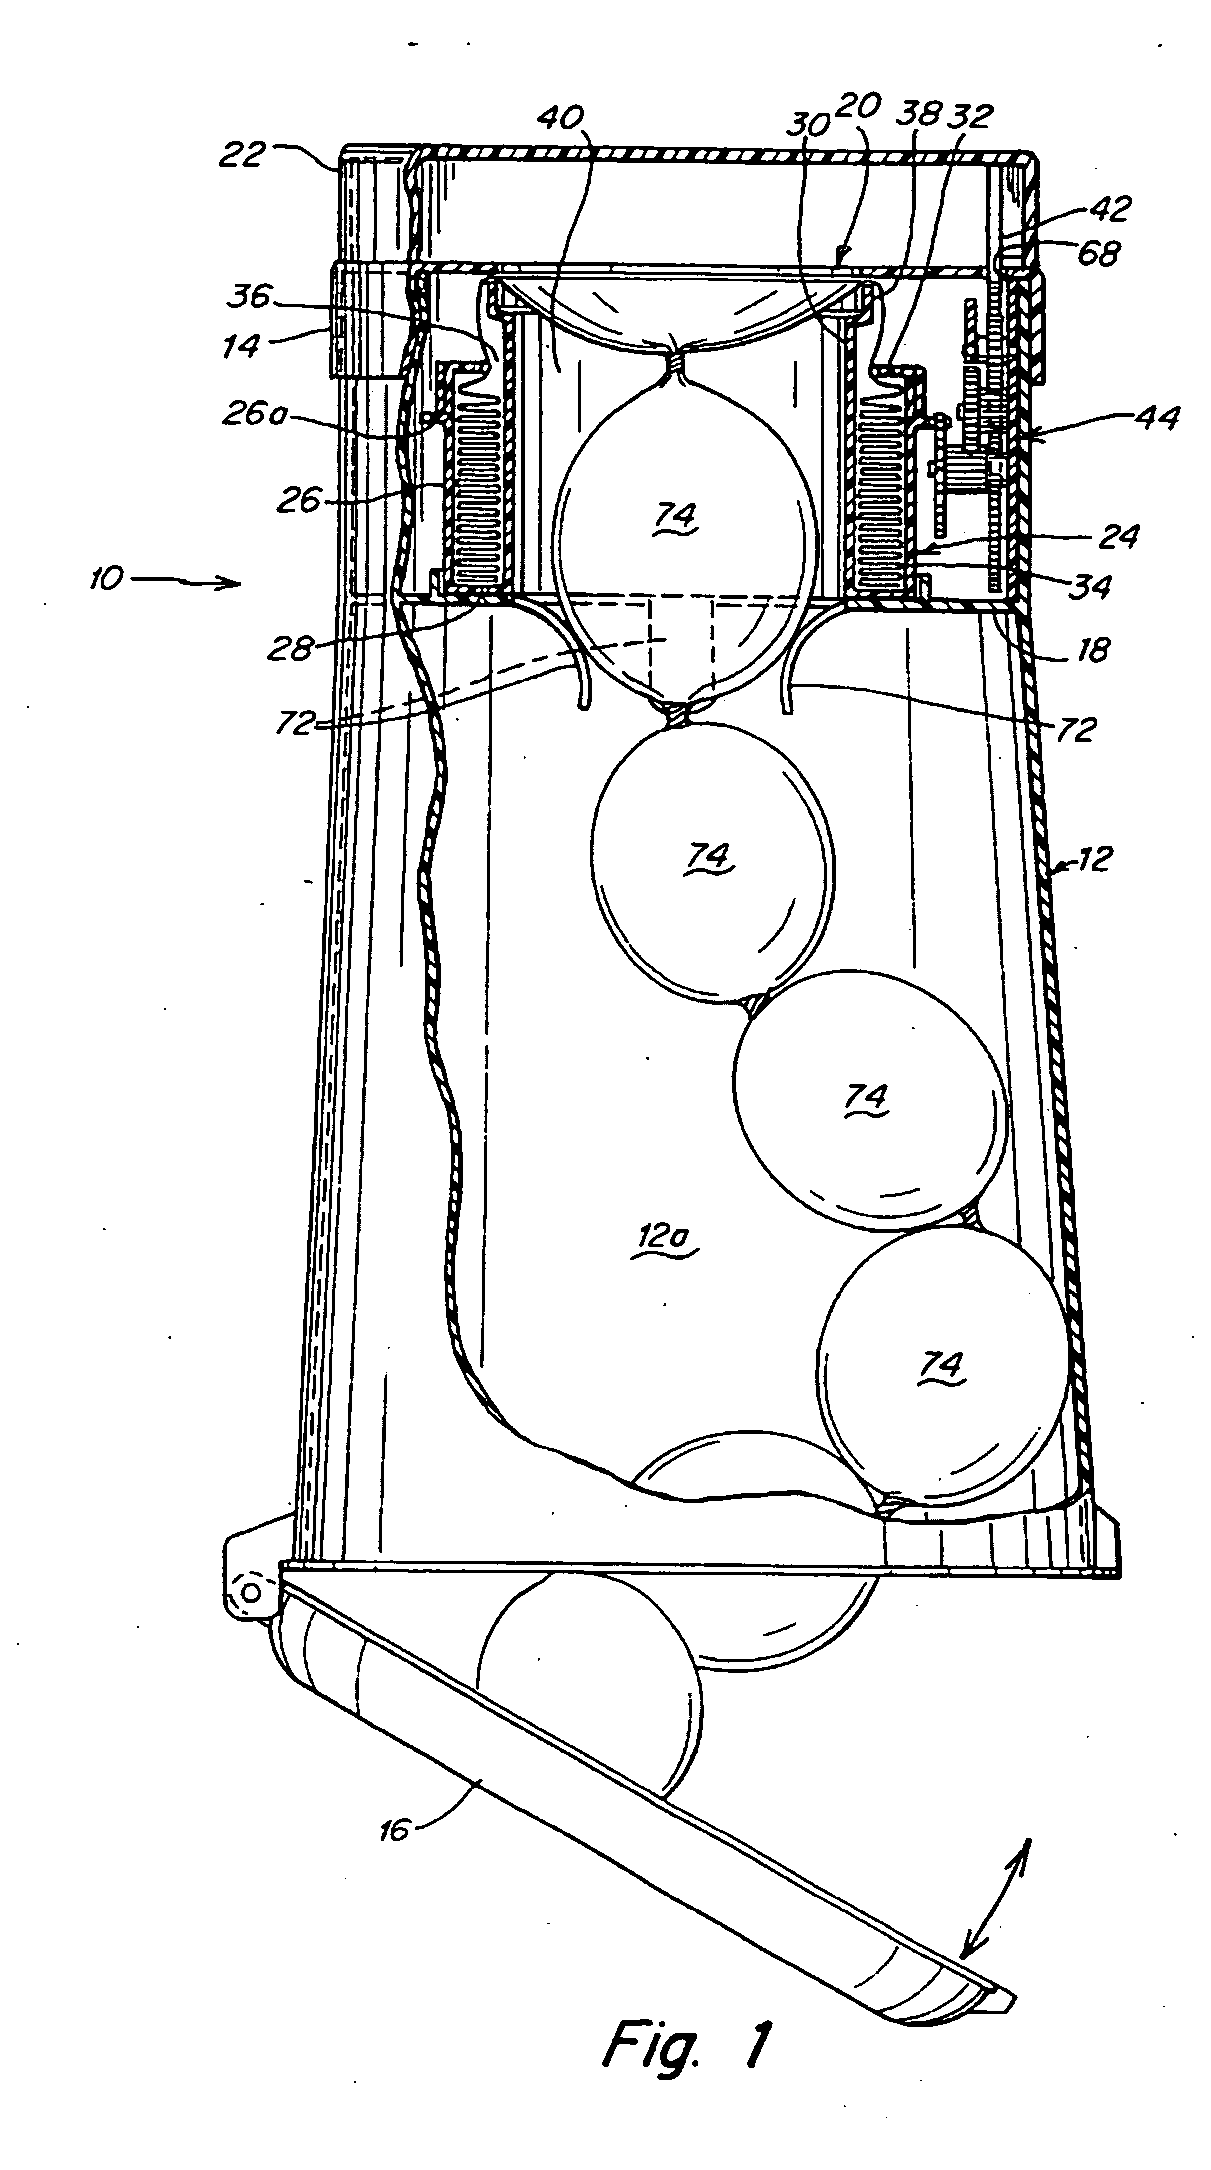 Waste disposal device including a cartridge movable by rollers